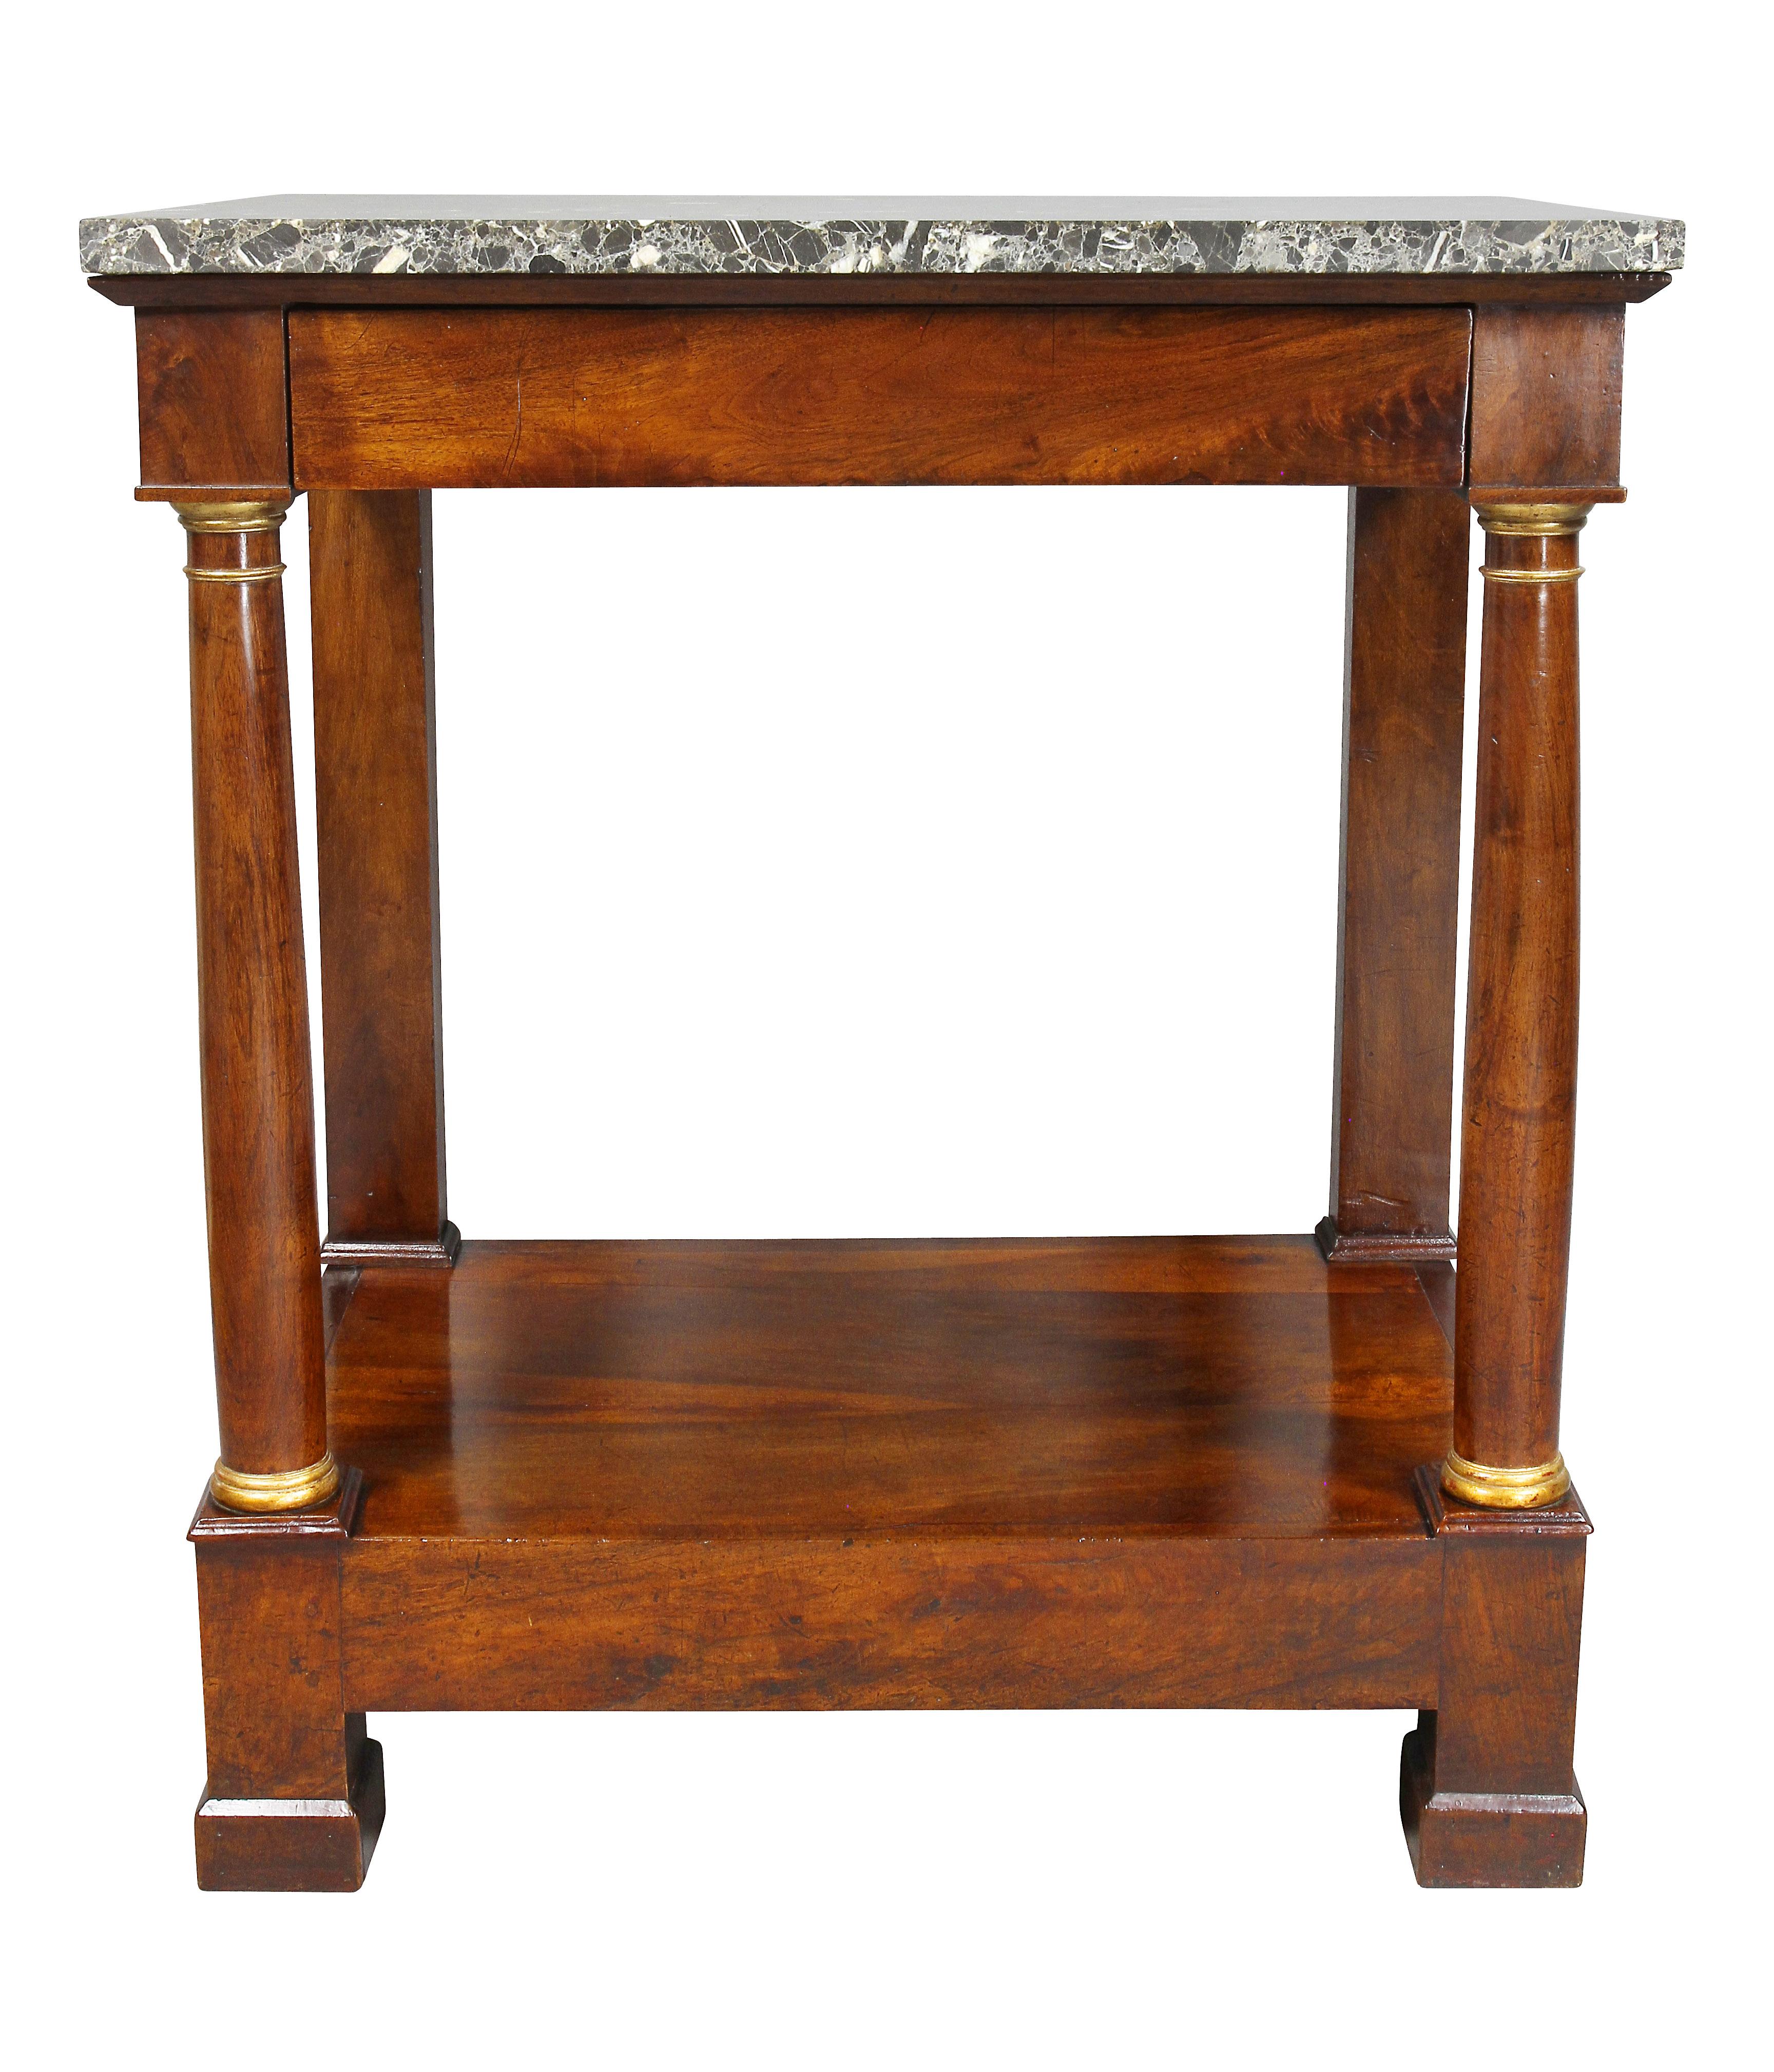 Rectangular original marble top over a frieze with drawer, all supported by parcel gilt columns joining a shelf, block feet.